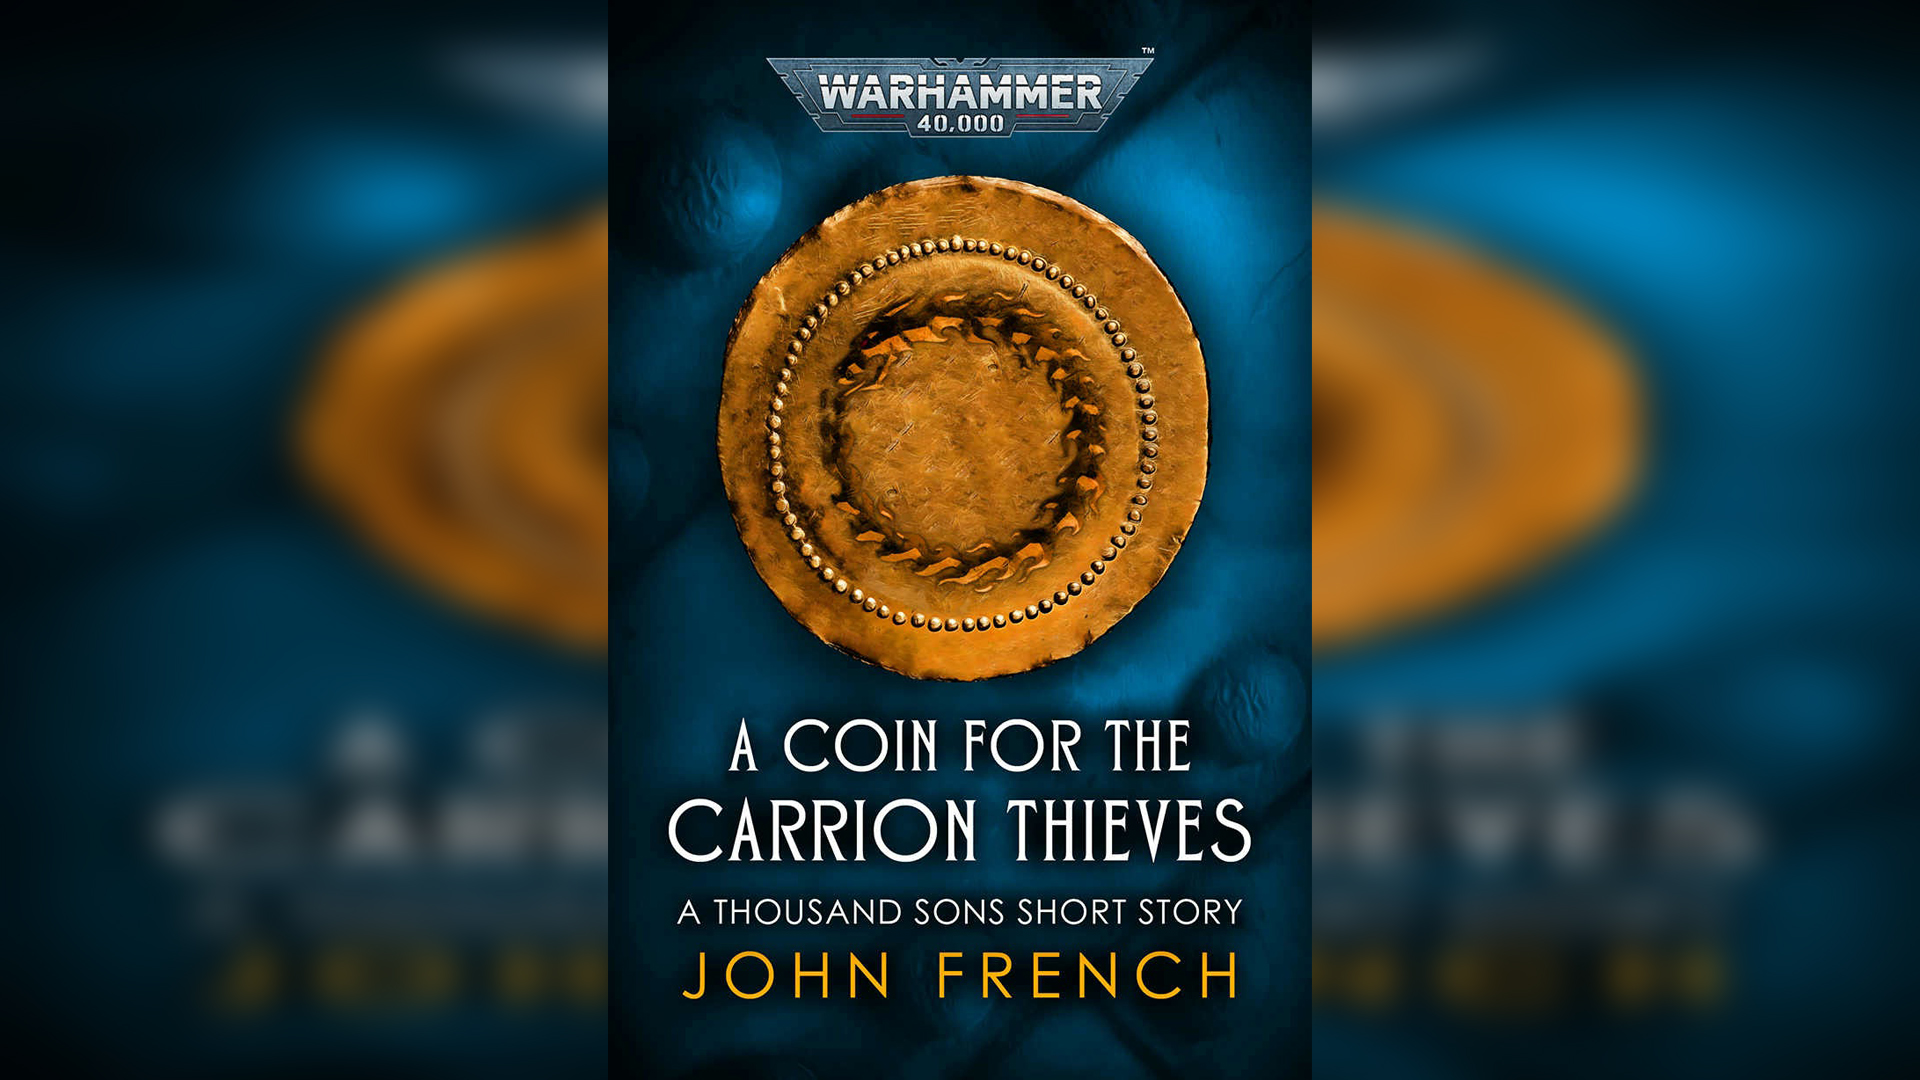 10. Монета для Воров Падали / "A Coin for the Carrion Thieves" (2020) by TheStation Warhammer